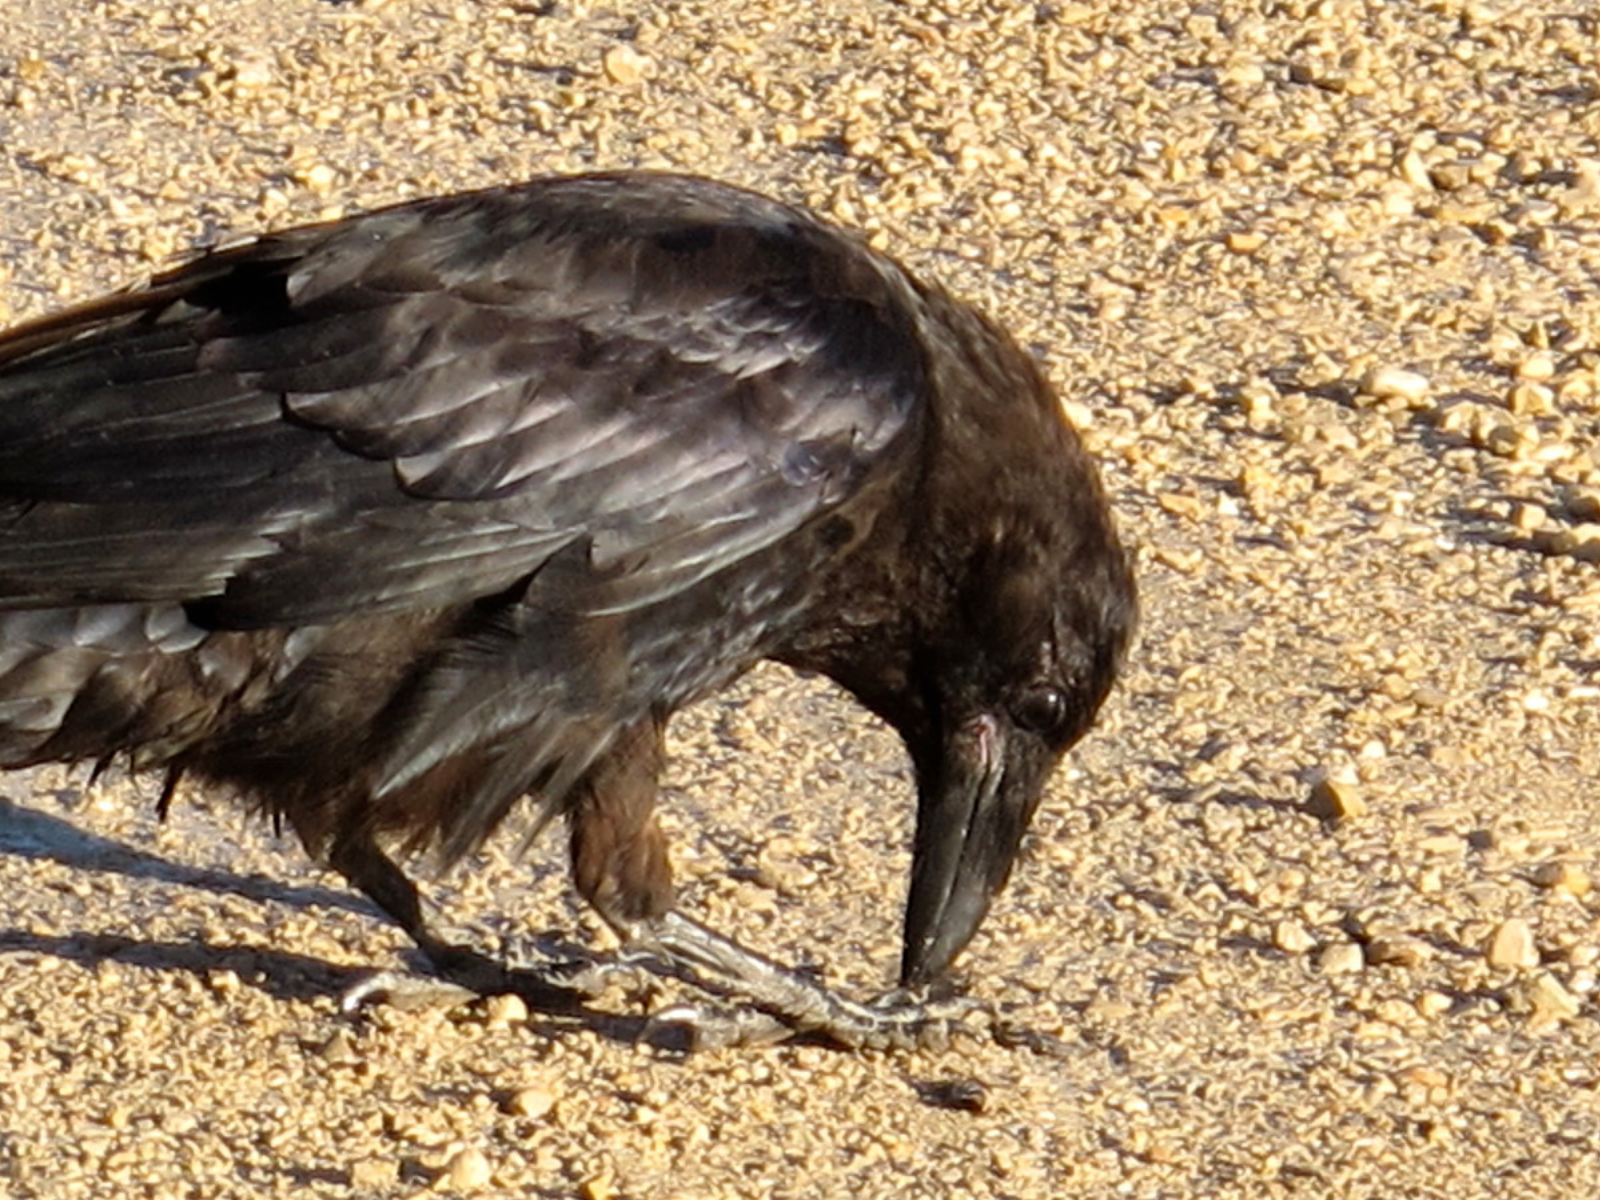 A black-feathered bird picking something up with its beak from the gravelly ground.